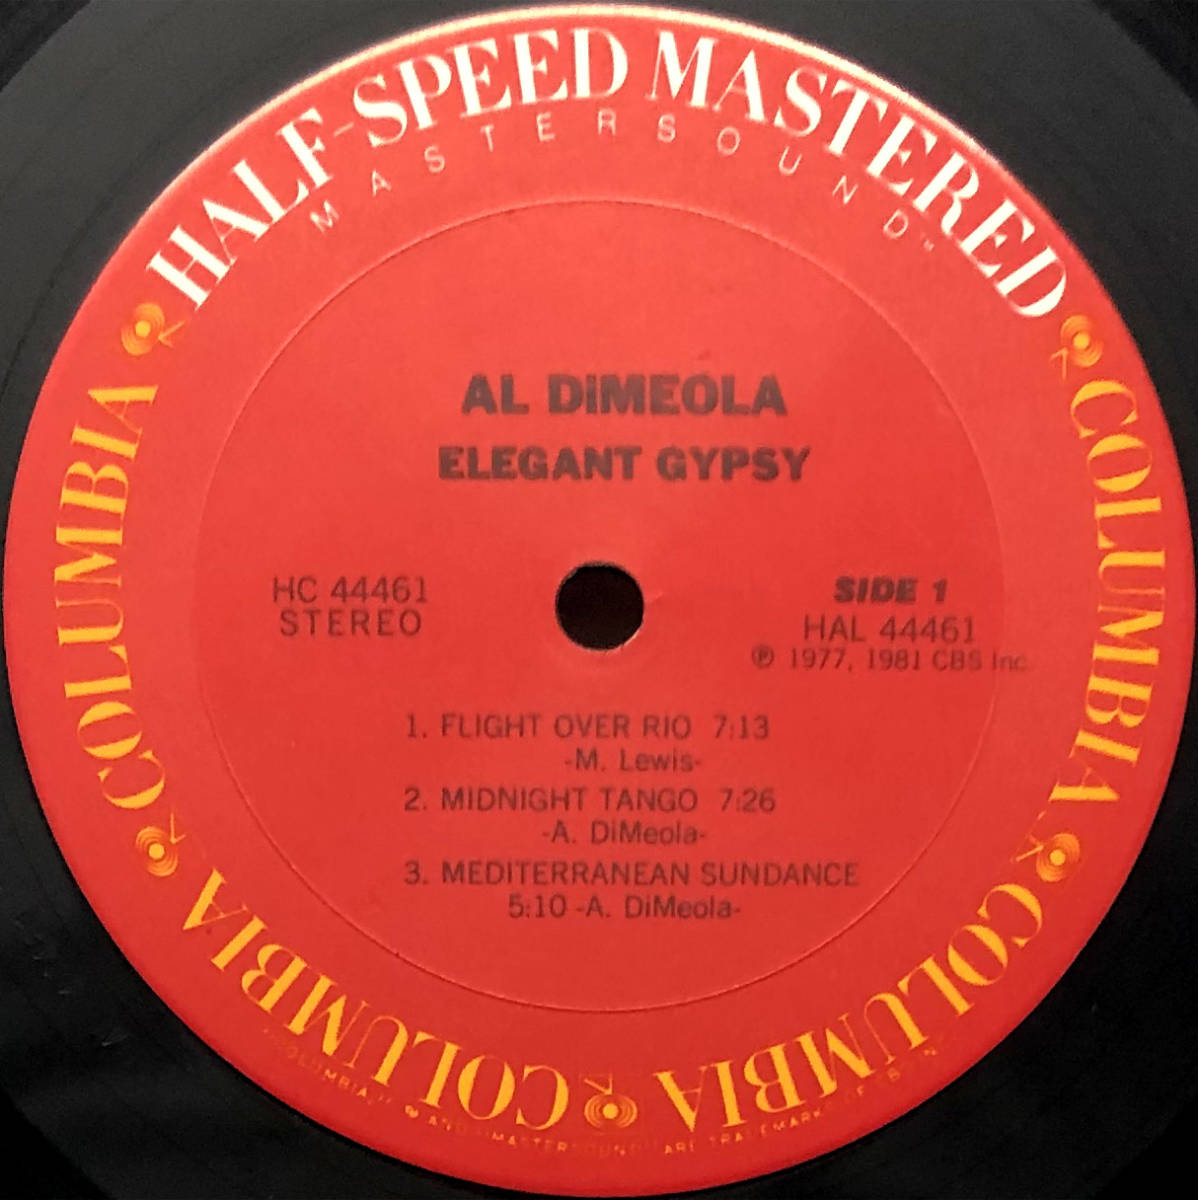 * good record US ORIG PROMO HALF-SPEED MASTERED LP*AL DI MEOLA/Elegant Gypsy 1977 year super . guitar highest . work MOBILE FIDELITY. average . height sound quality record 